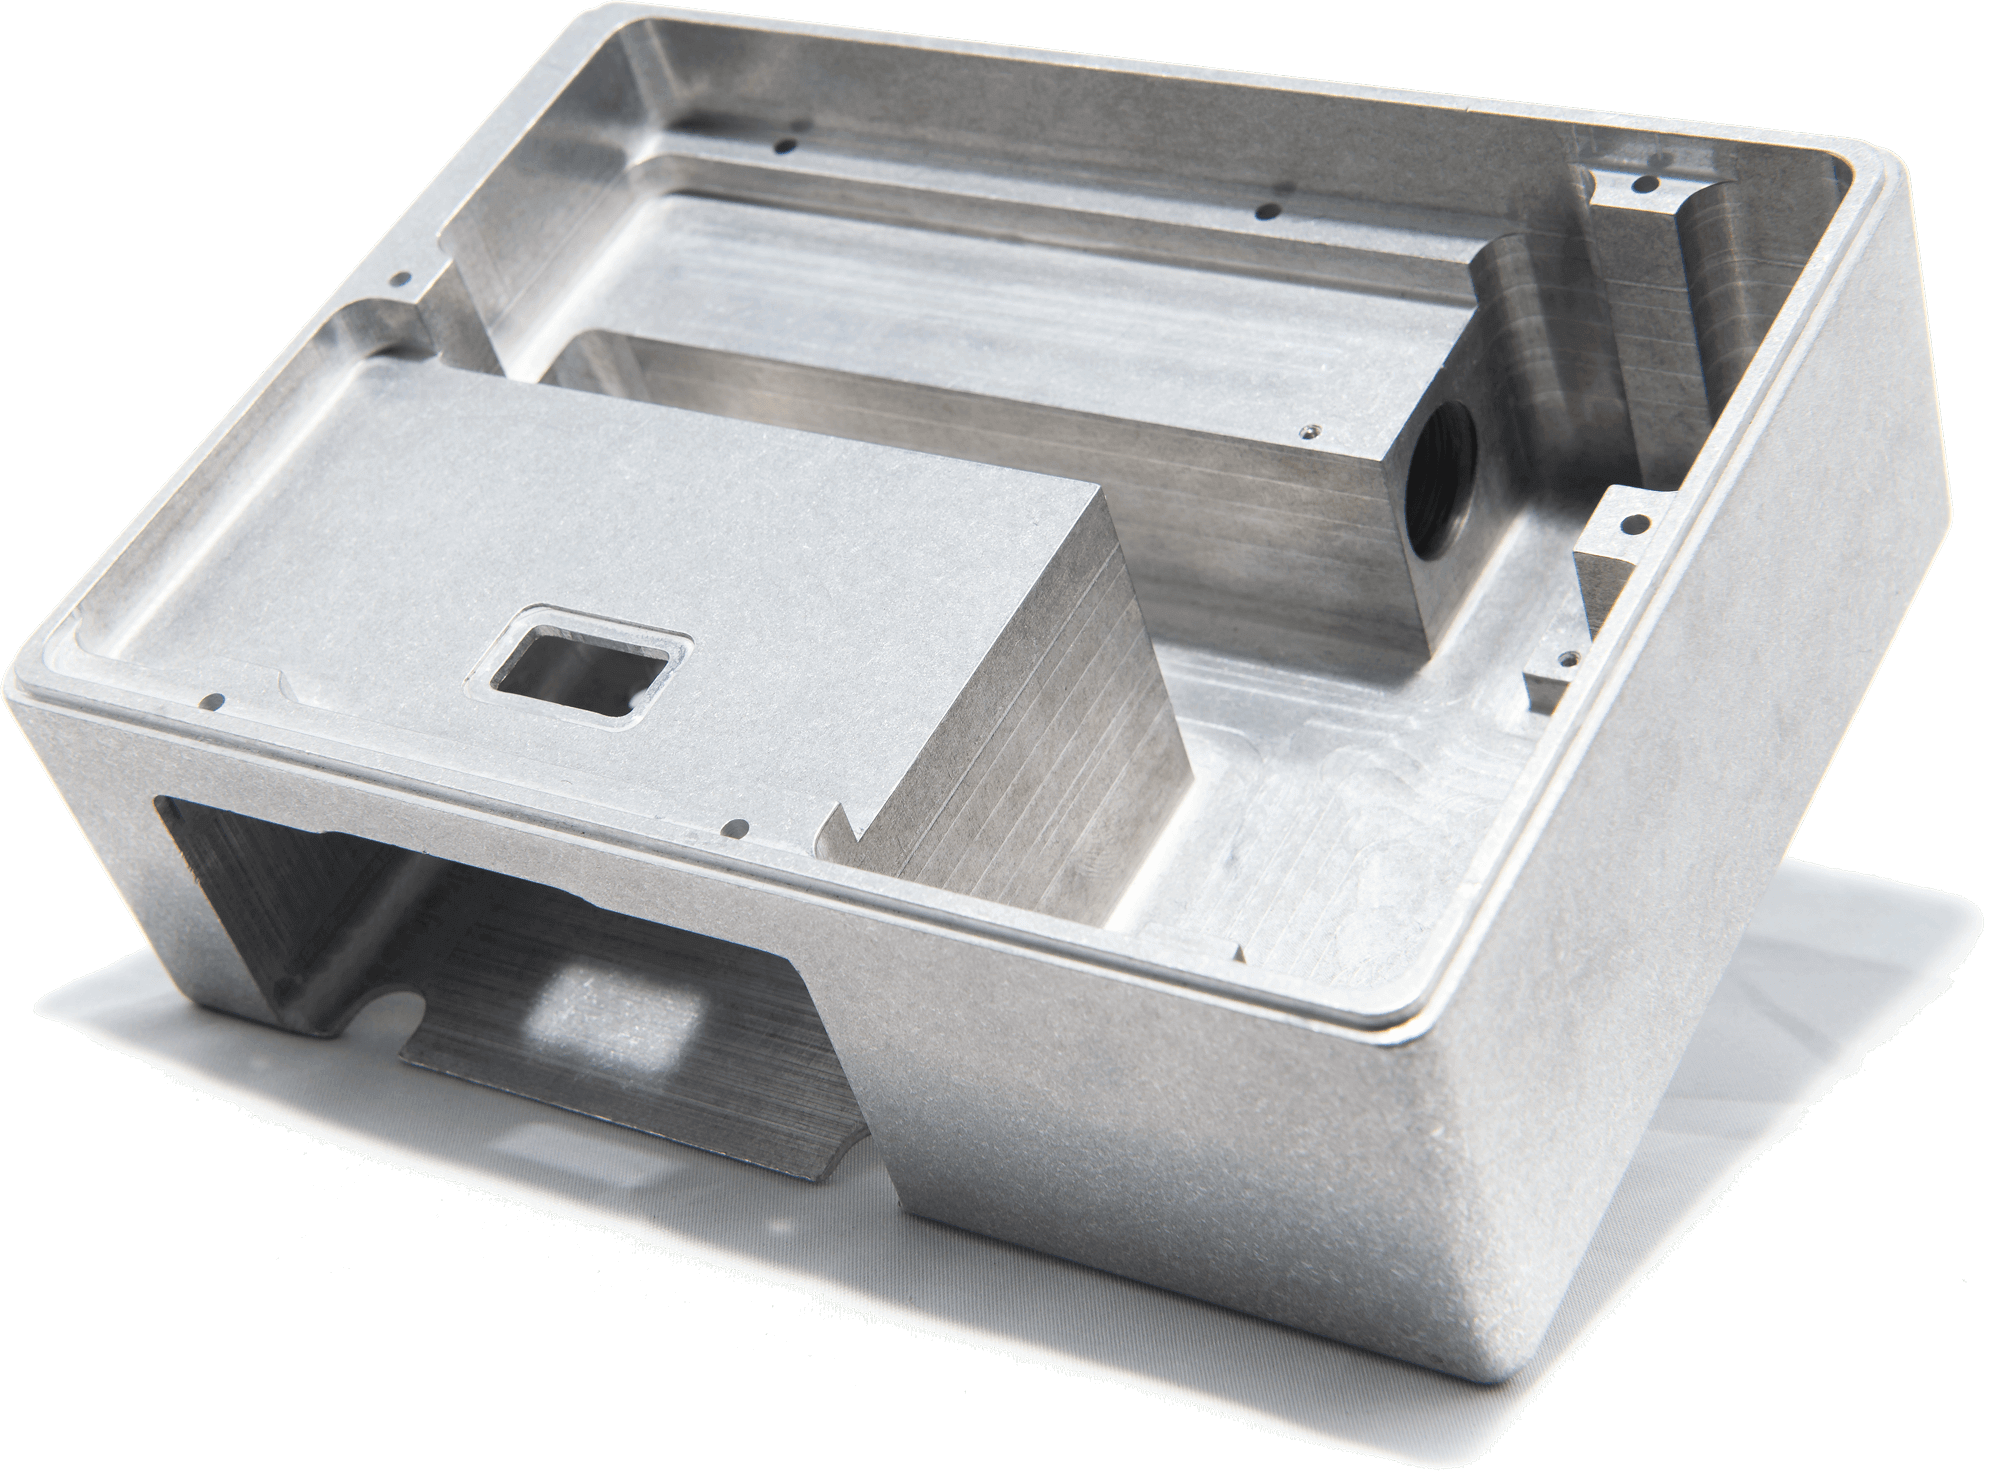 Sheet Metal Fabricated & CNC Machined Medical Device Prototypes